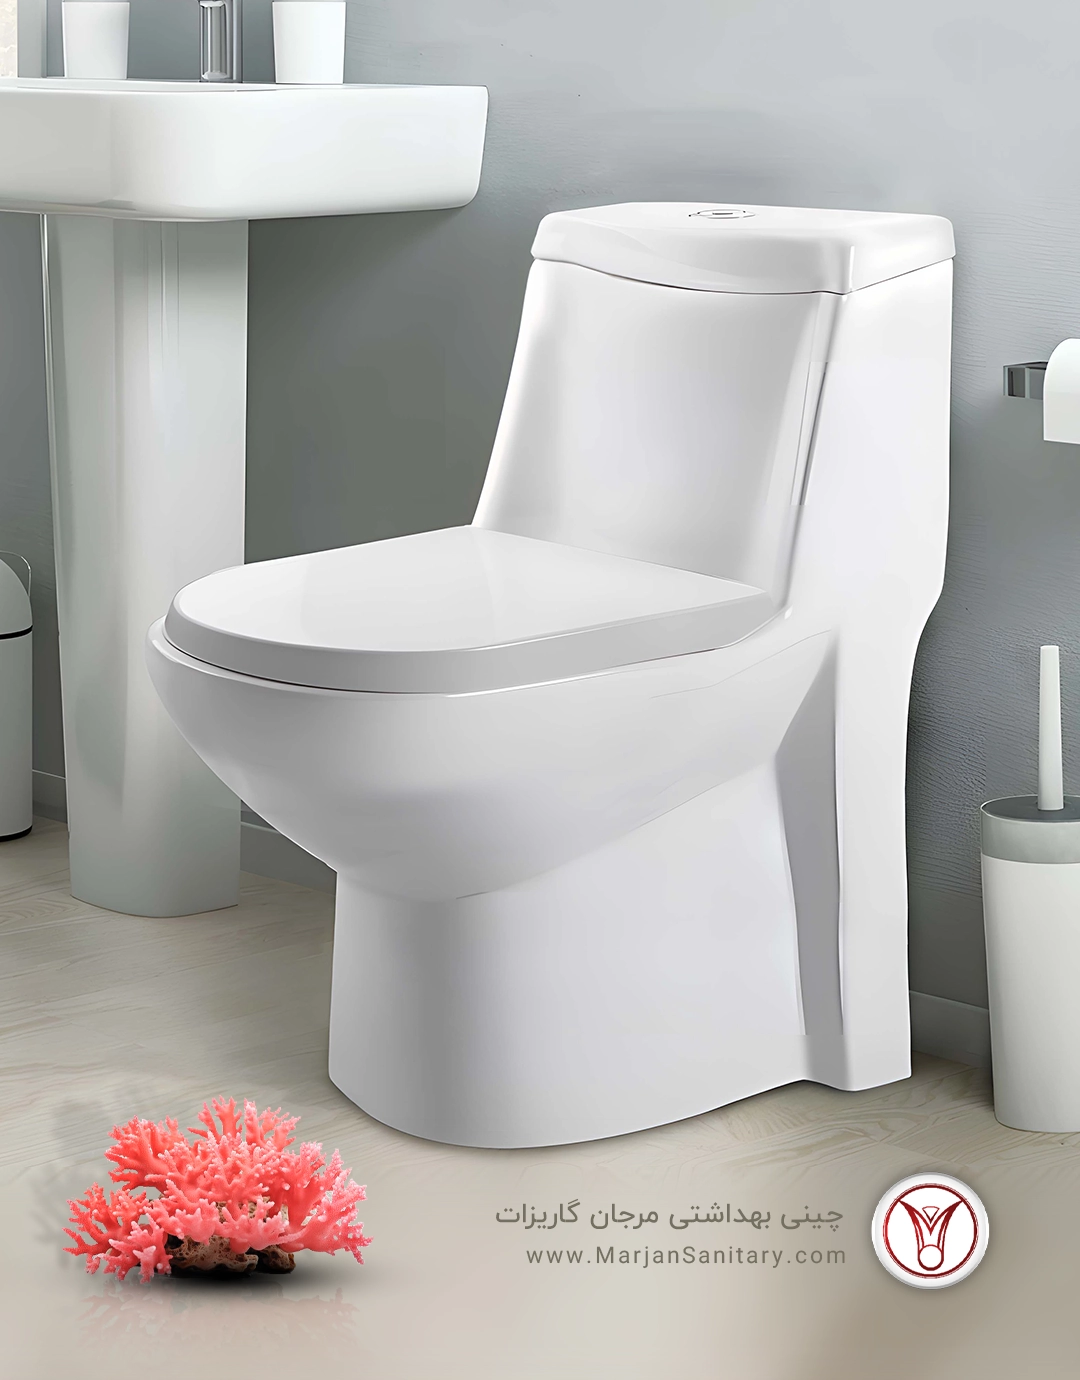 015 - product images - toilet - Queen - p